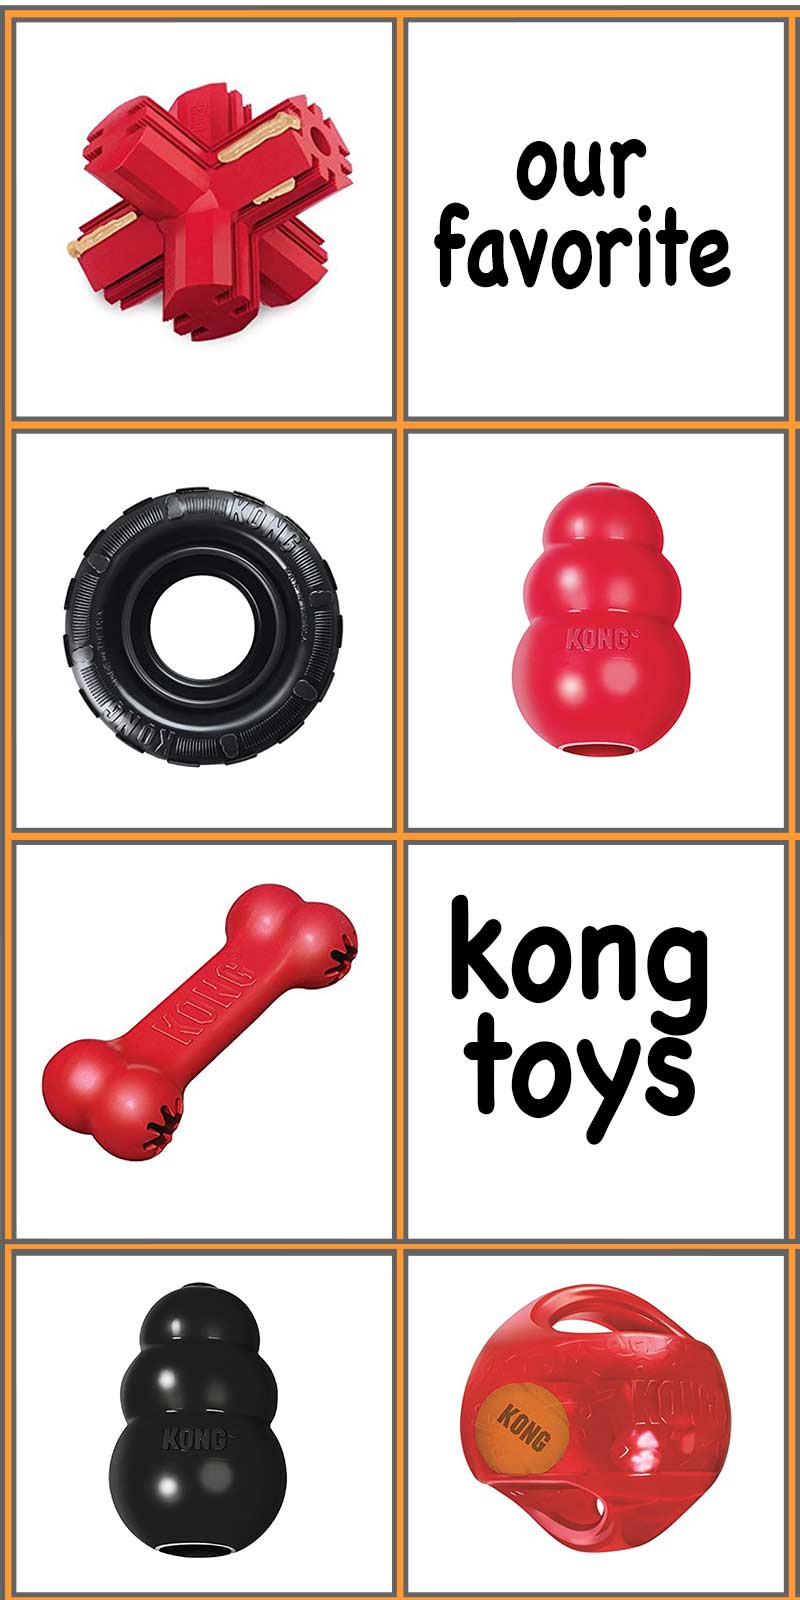 A collection of our favorite Kong Toys for you to browse. Lot's of great toy reviews too